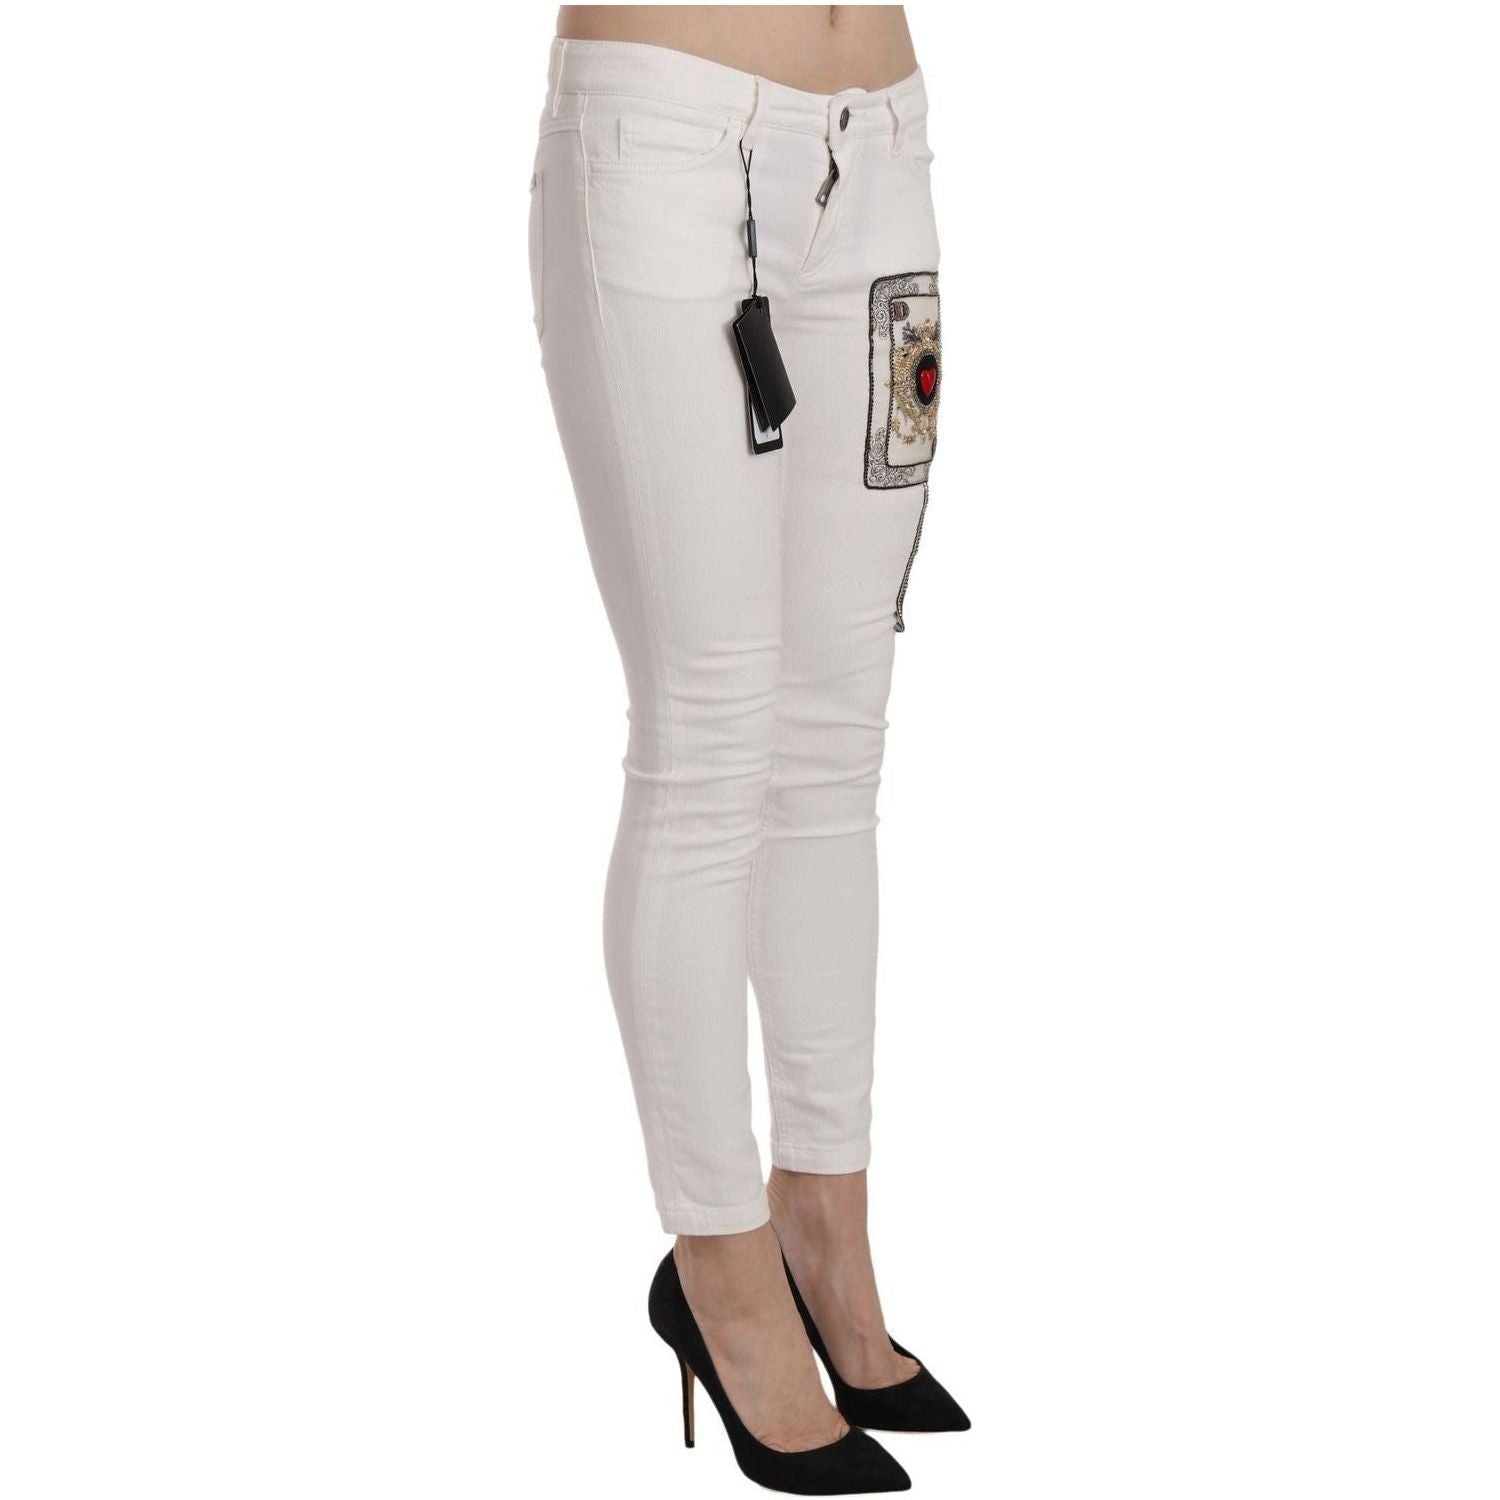 Dolce & Gabbana Queen Of Hearts Crystal Skinny Jeans